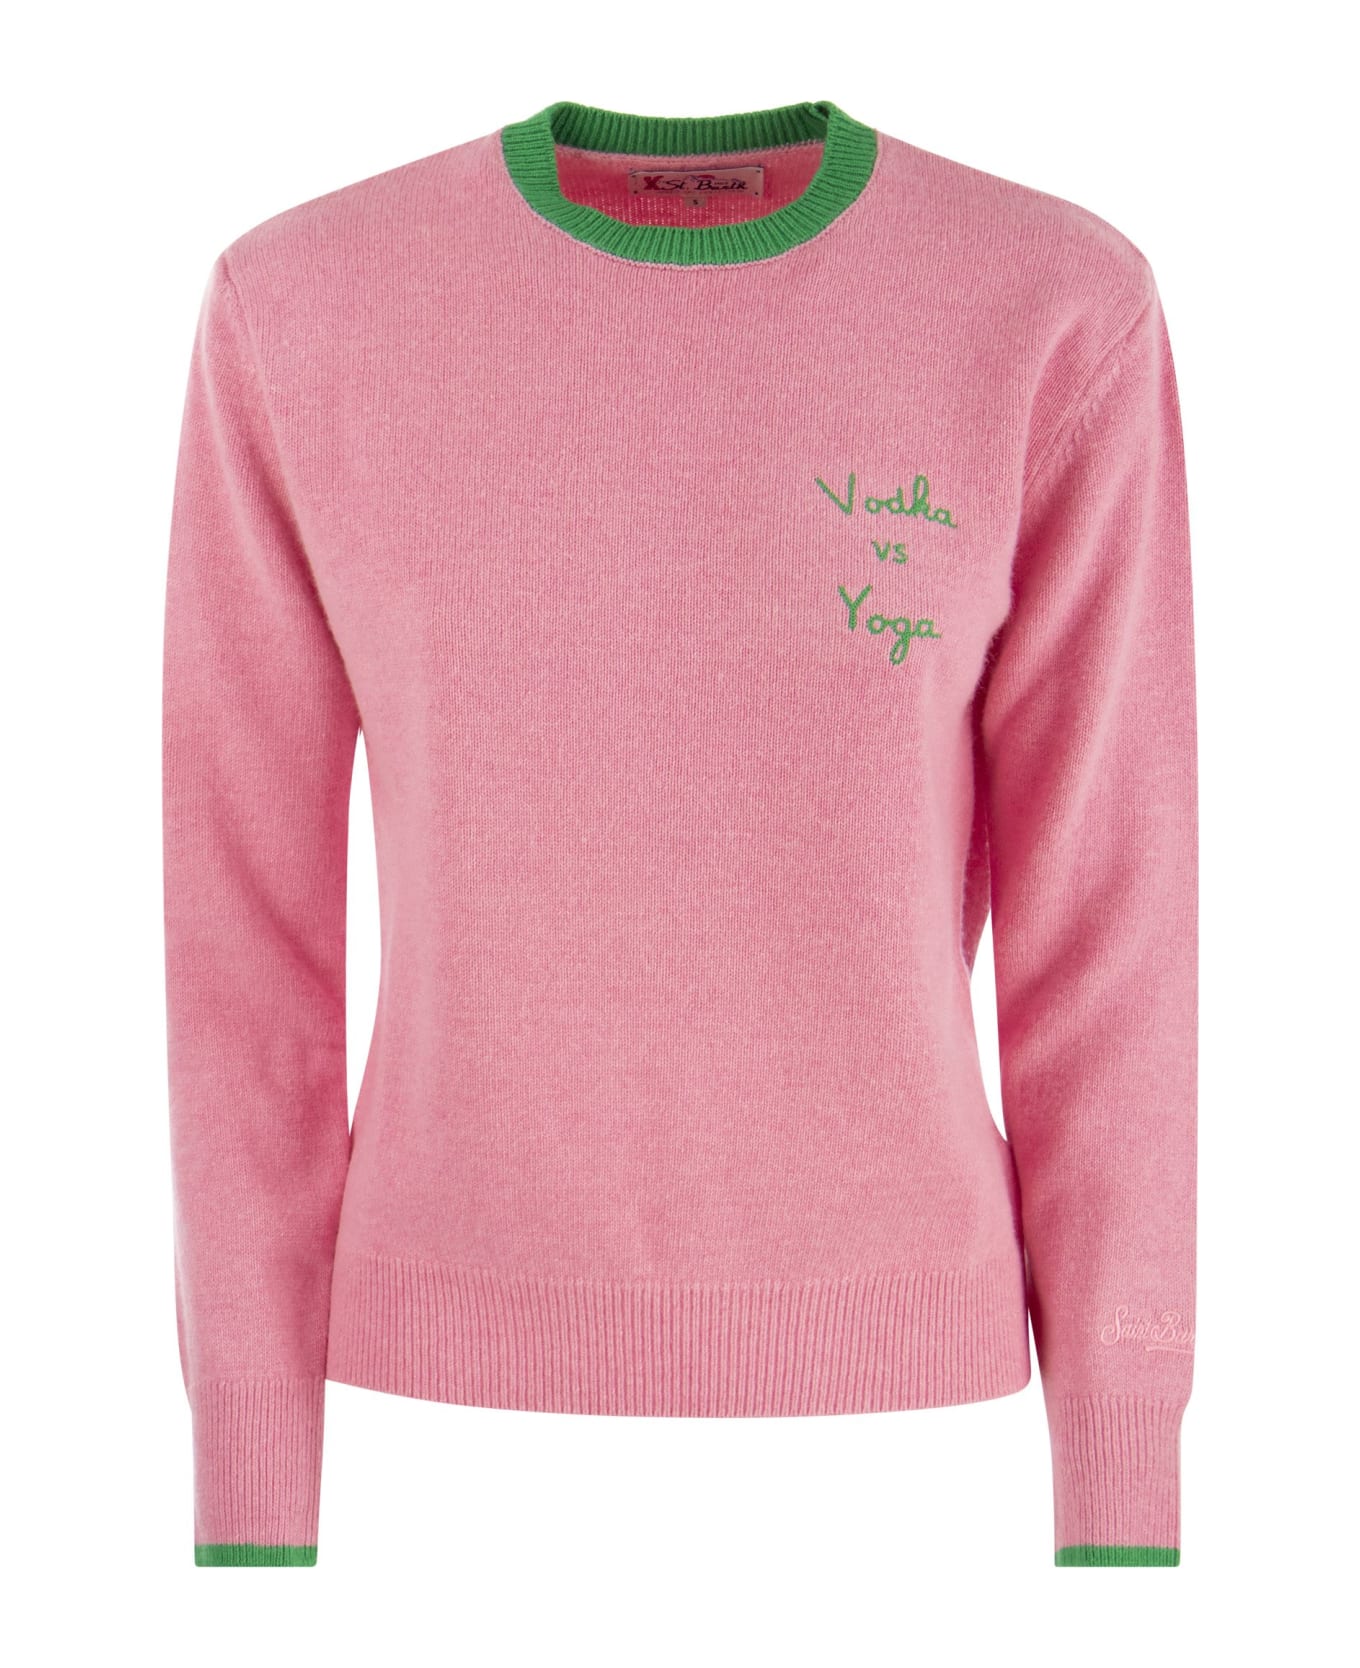 MC2 Saint Barth Wool And Cashmere Blend Jumper With Vodka Vs Yoga Embroidery - Pink